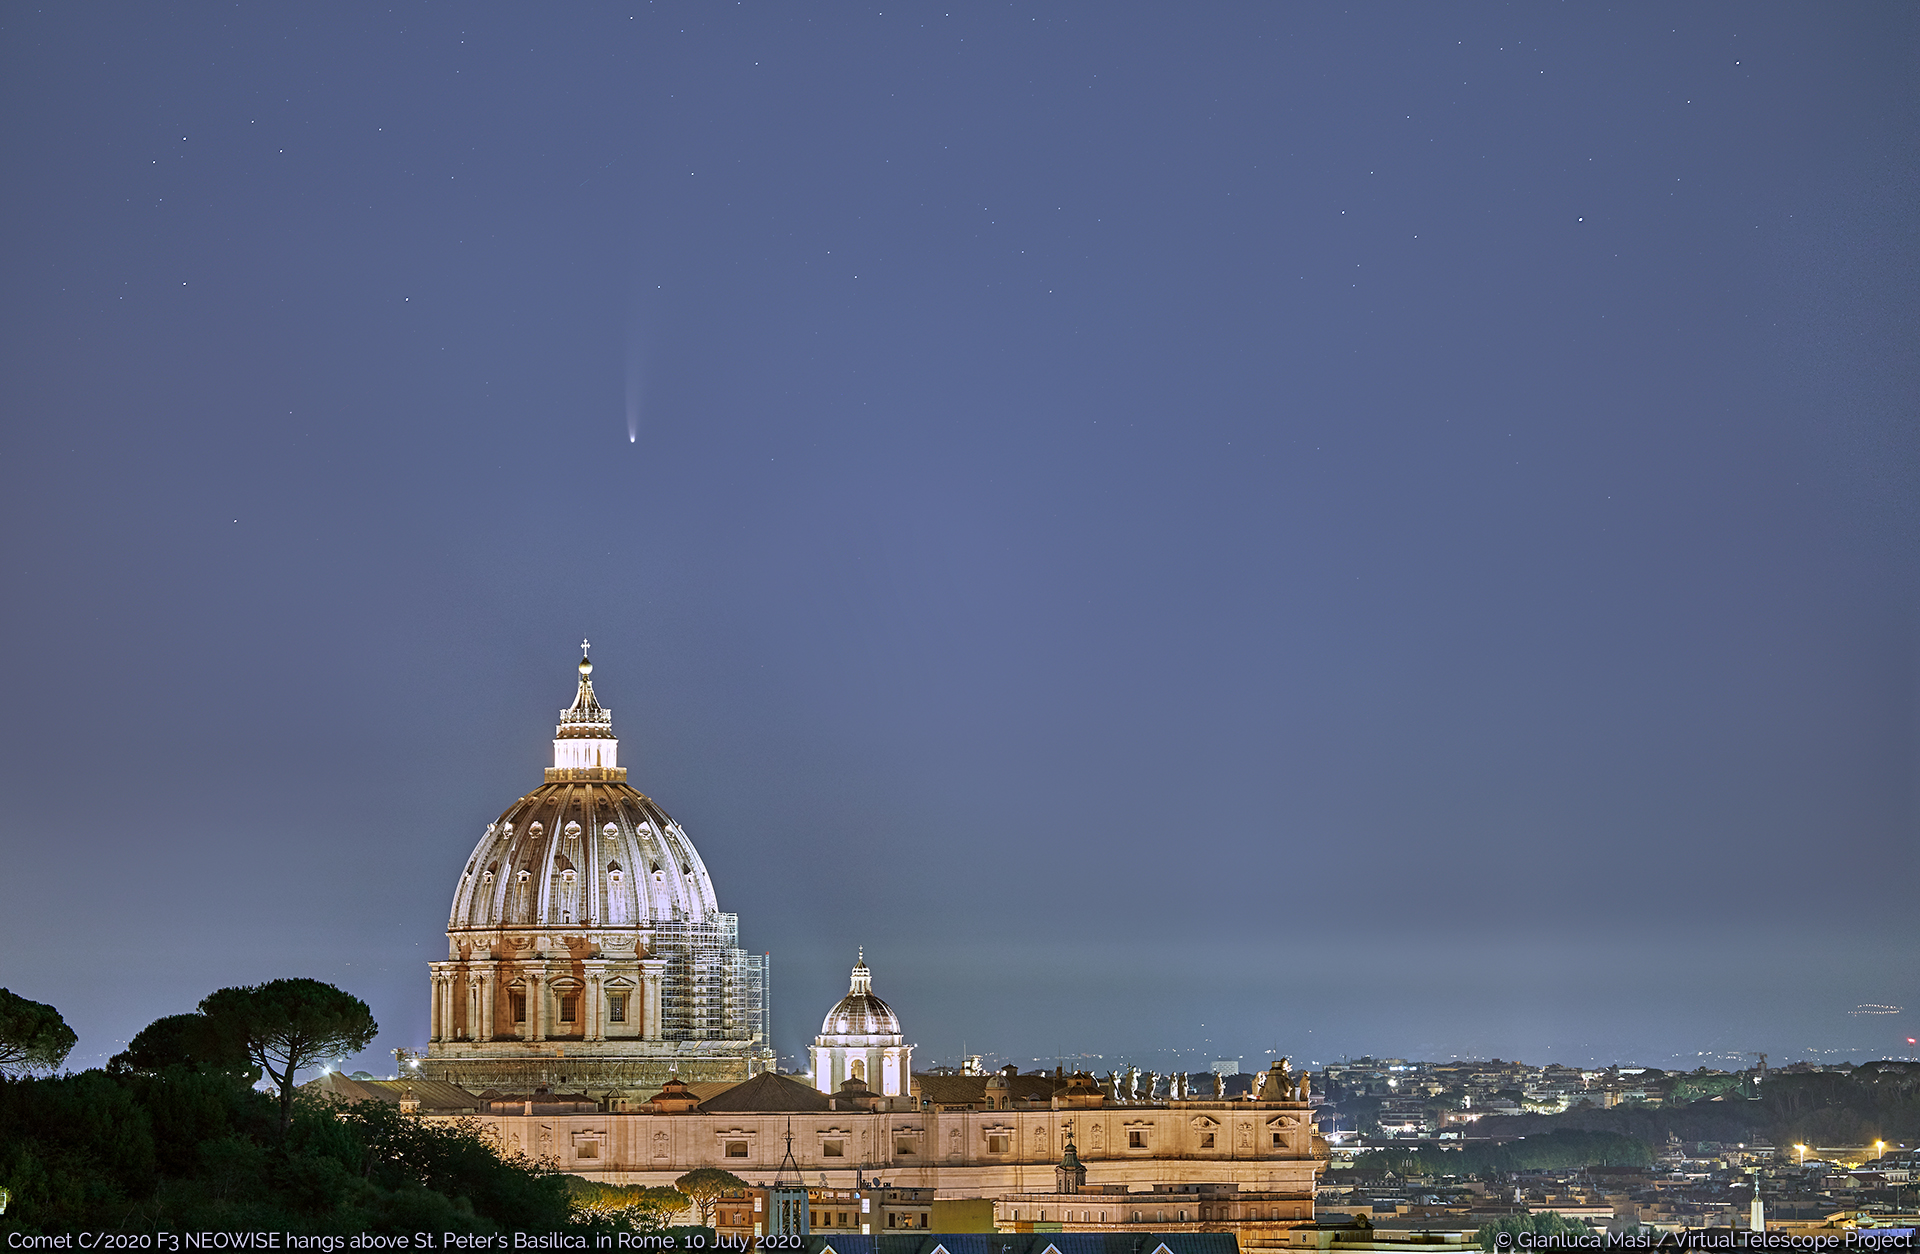 Comet C/2020 F3 NEOWISE hangs above the St. Peter's Basilica in Rome - 10 July 2020.